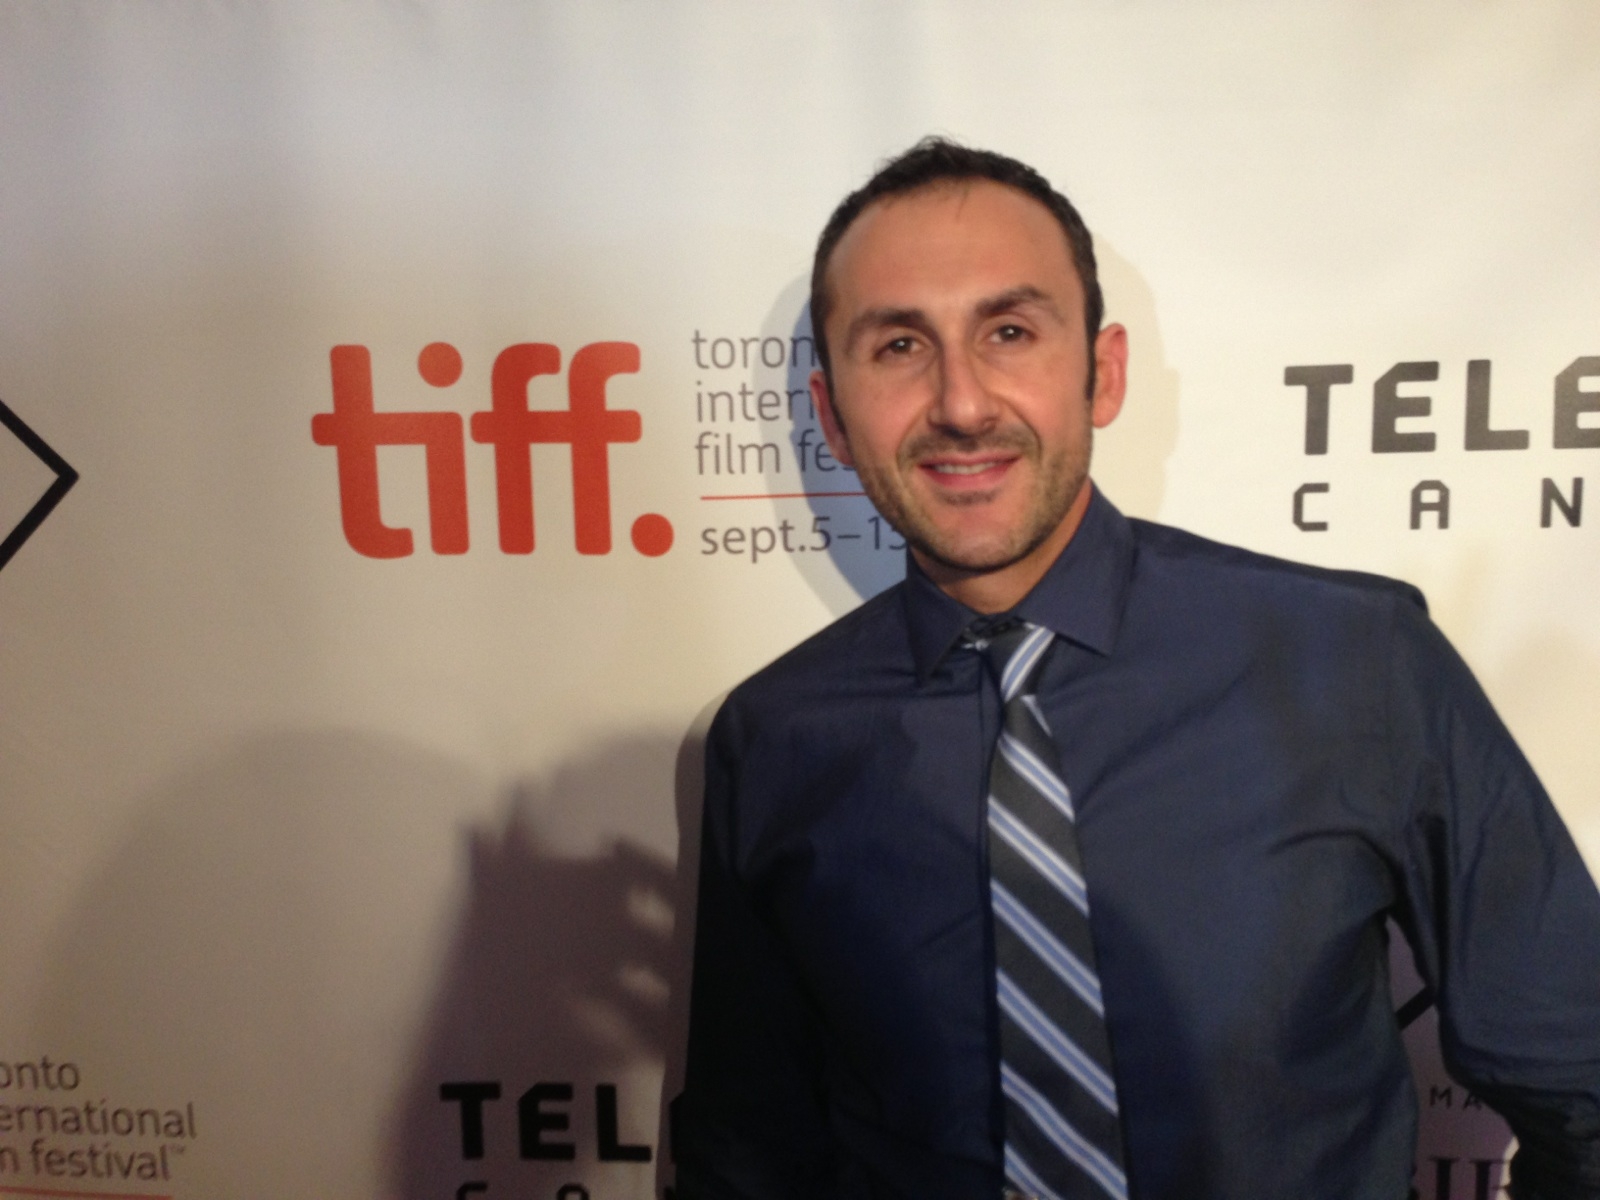 On the Red Carpet at TIFF 2013